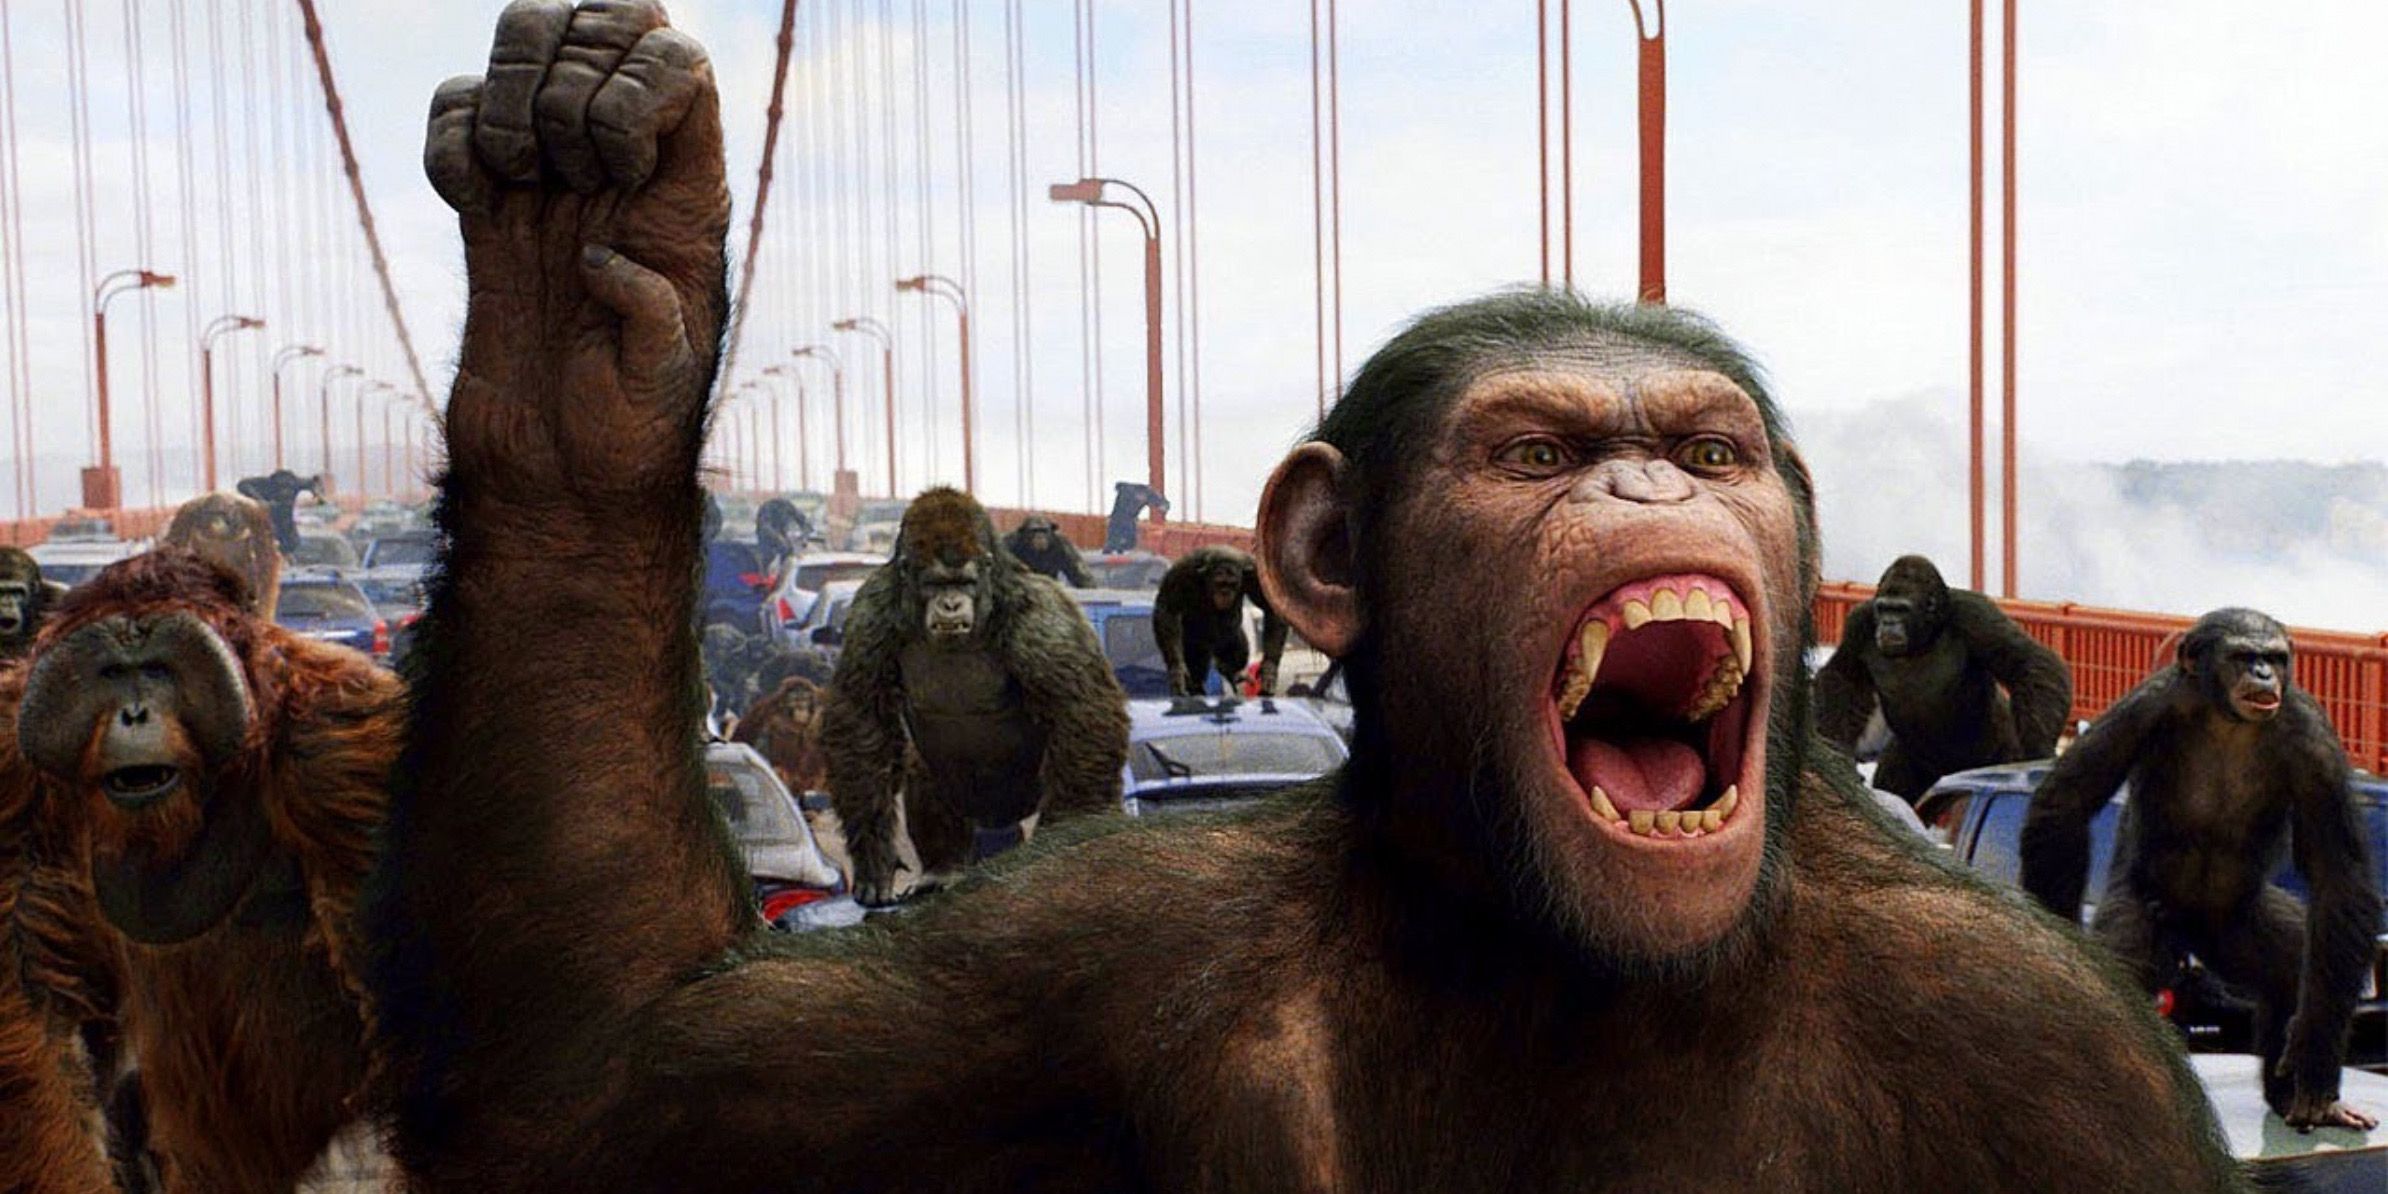 Caesar cries out to rally his allies in Planet of the Apes